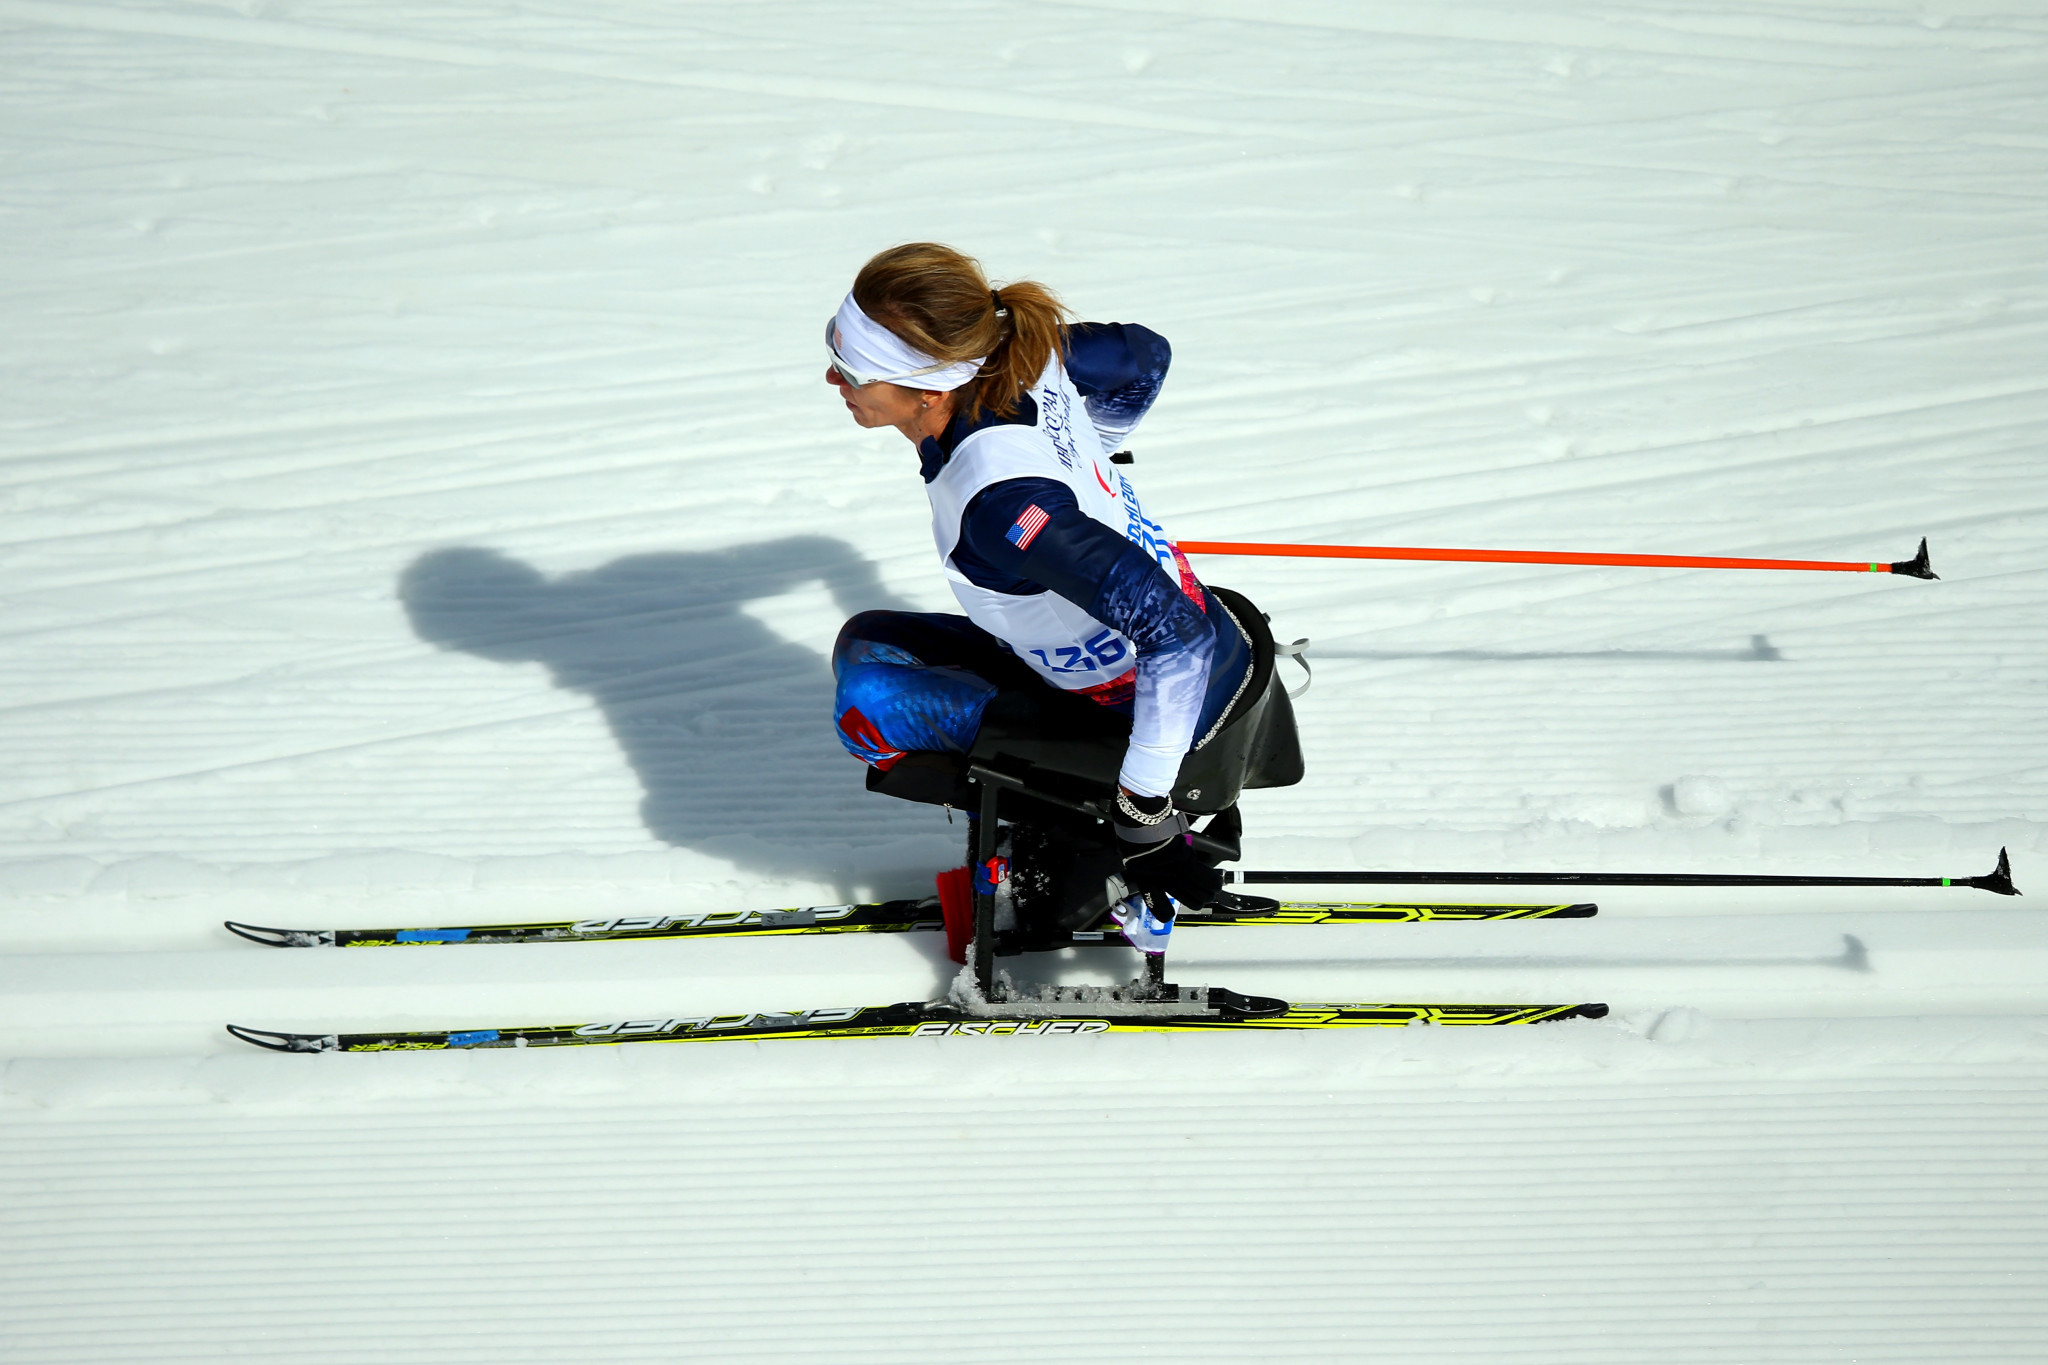 A fundraising event for the United States Paralympic Ski and Snowboard team has been cancelled due to the coronavirus pandemic ©Getty Images